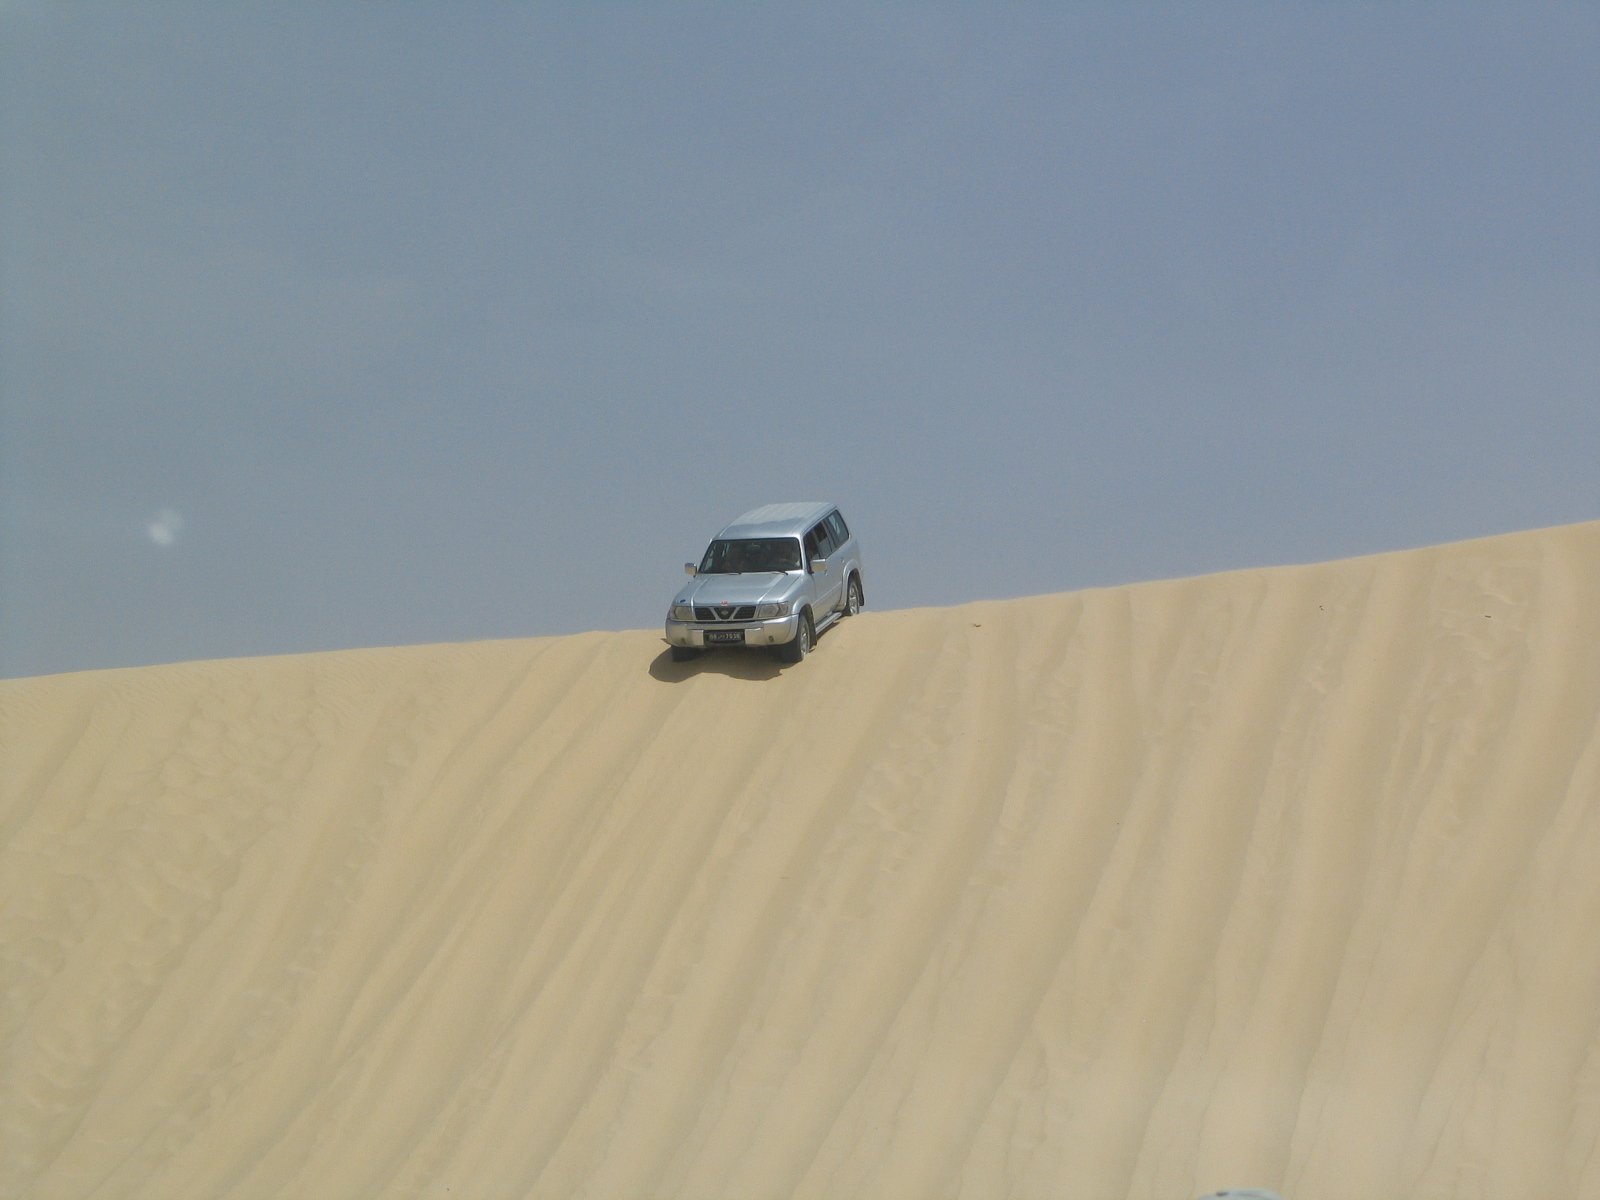 the pickup truck is going up the sand dunes